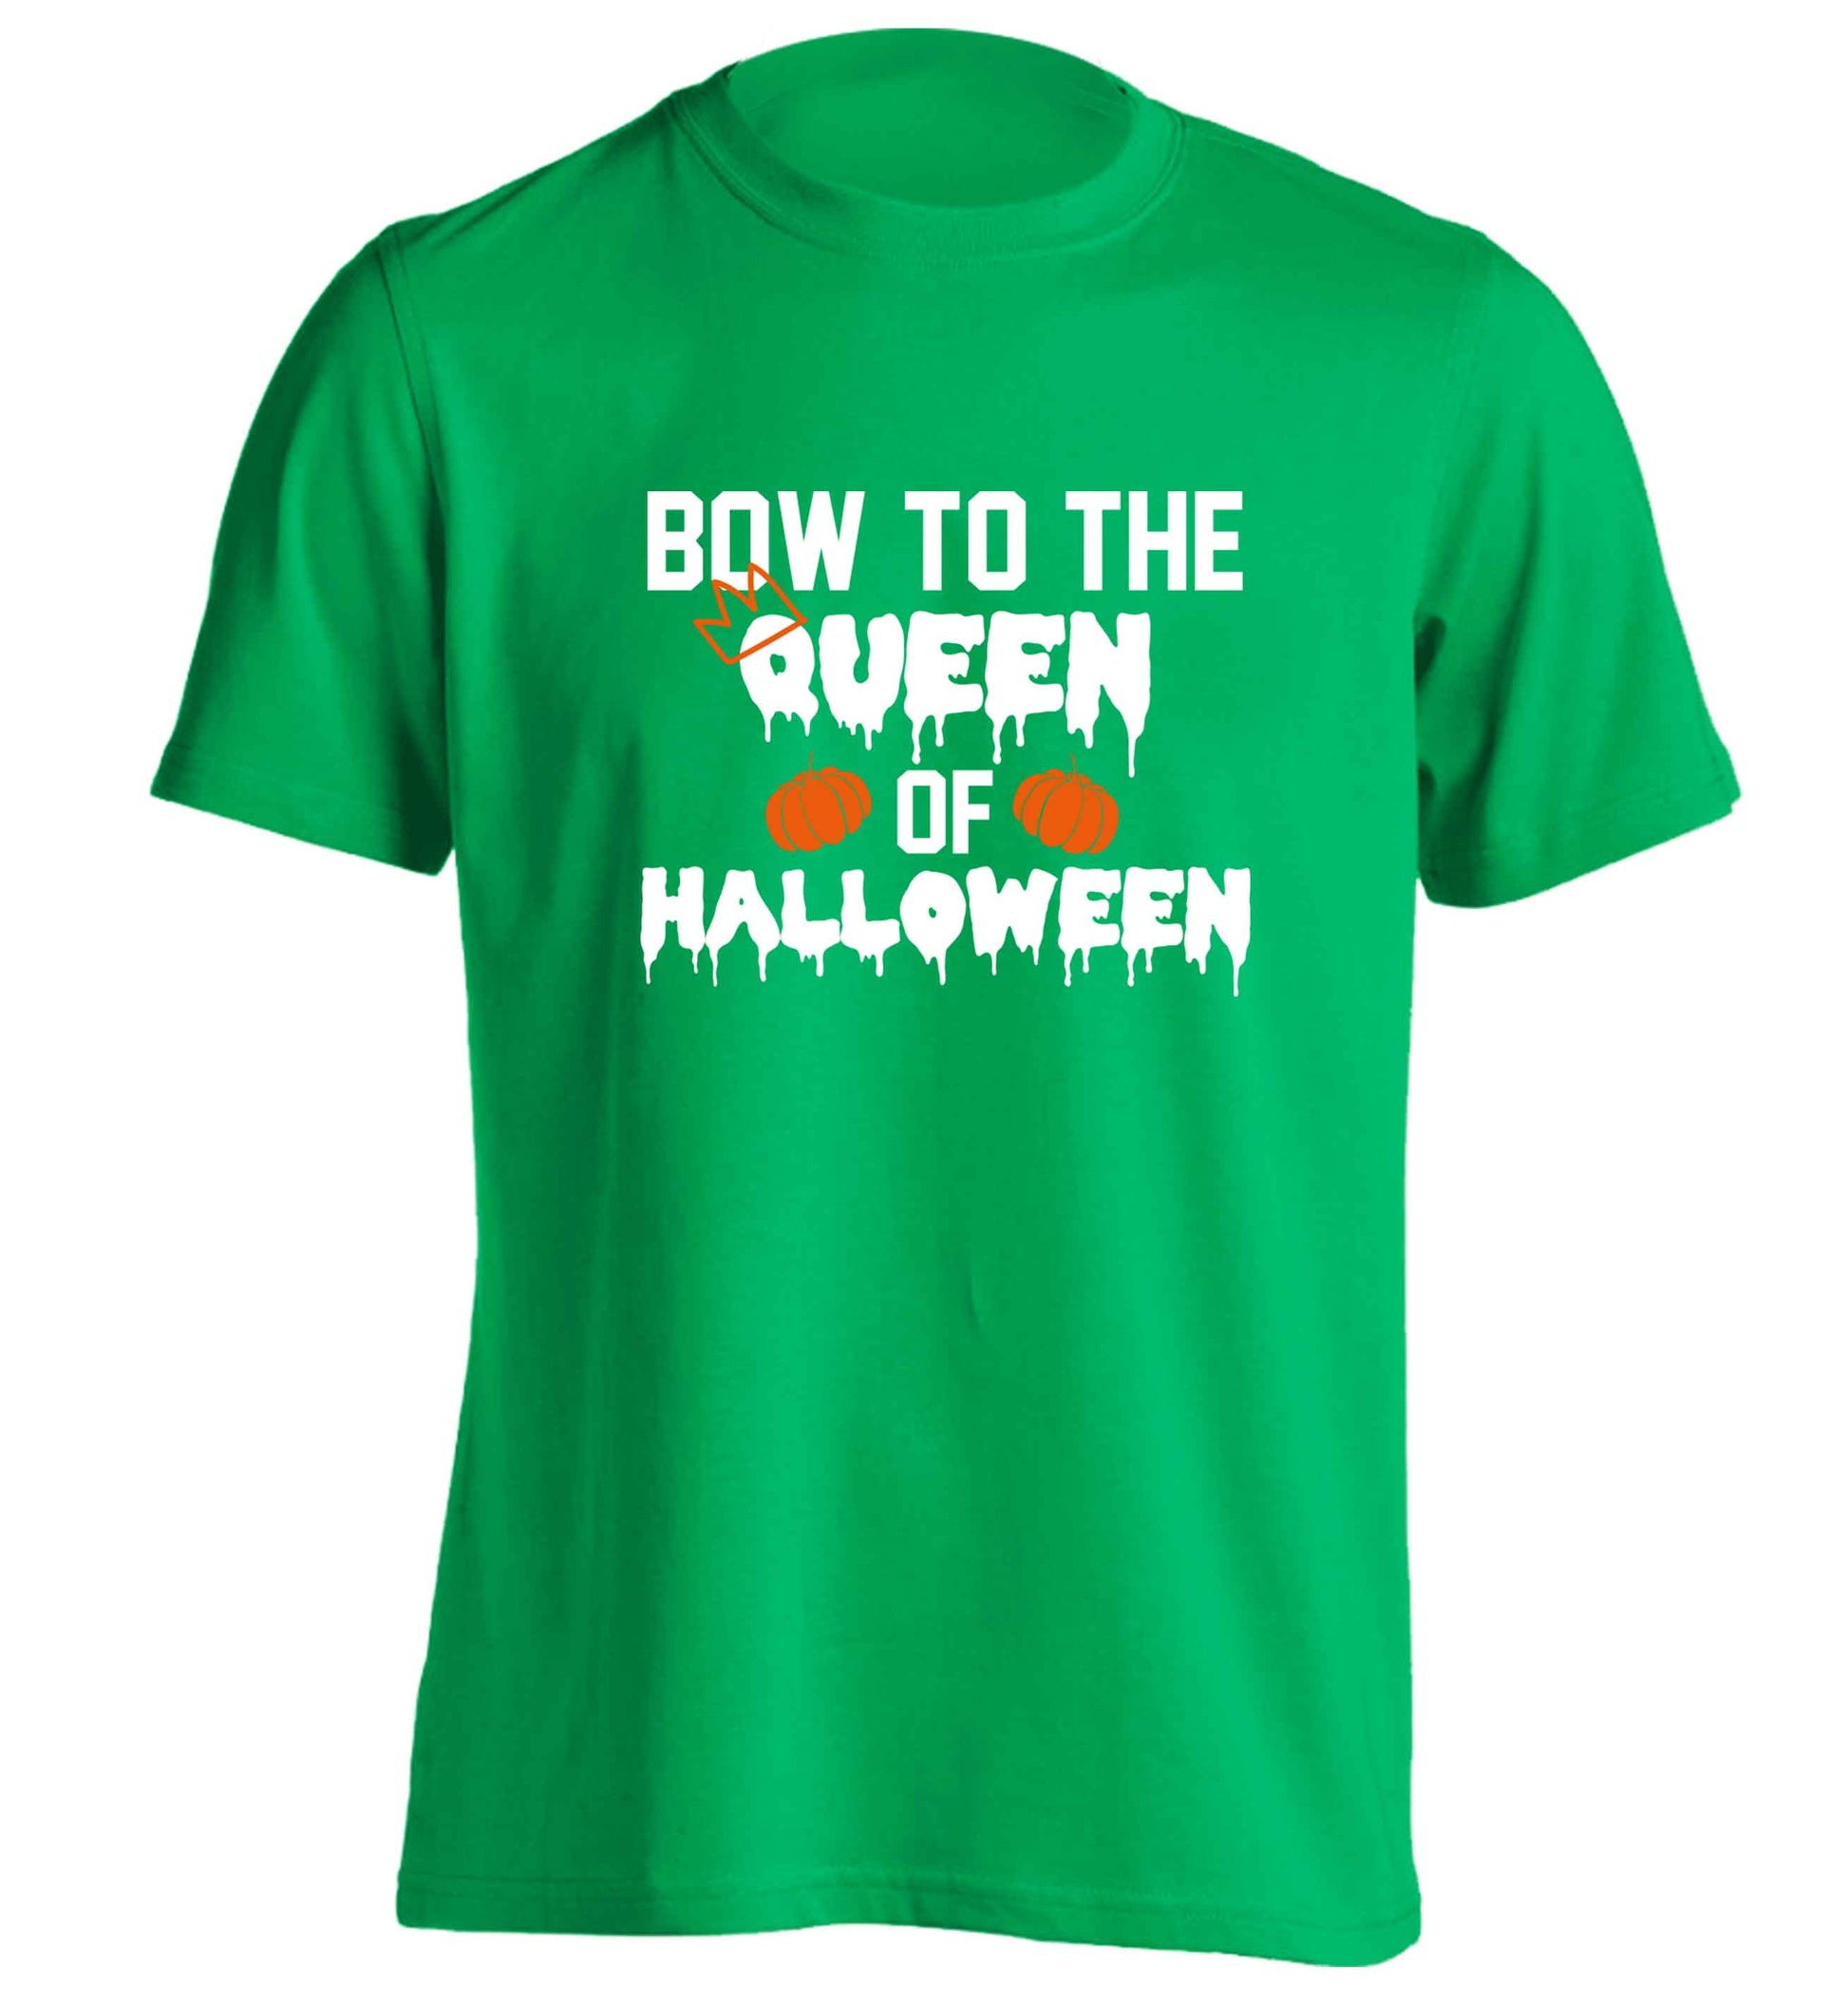 Bow to the Queen of halloween adults unisex green Tshirt 2XL